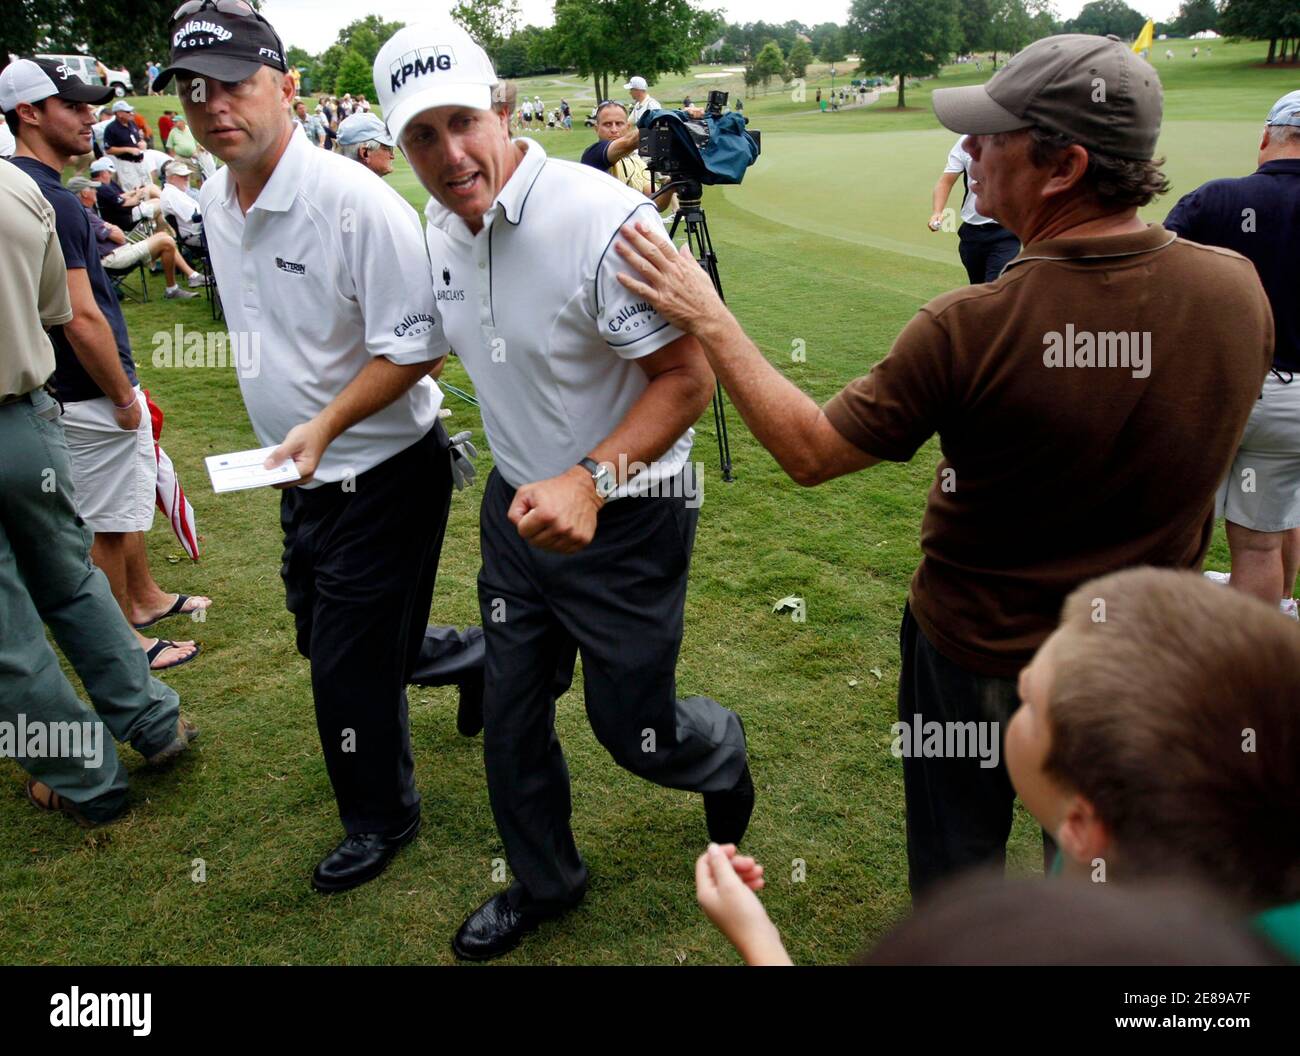 Cameron Beckman (L), of the U.S., and Phil Mickelson (C), of the U.S., walk off the 17th green during the first round of the St. Jude Classic at TPC Southwind in Memphis, Tennessee June 11, 2009.   REUTERS/Nikki Boertman    (UNITED STATES SPORT GOLF) Stock Photo